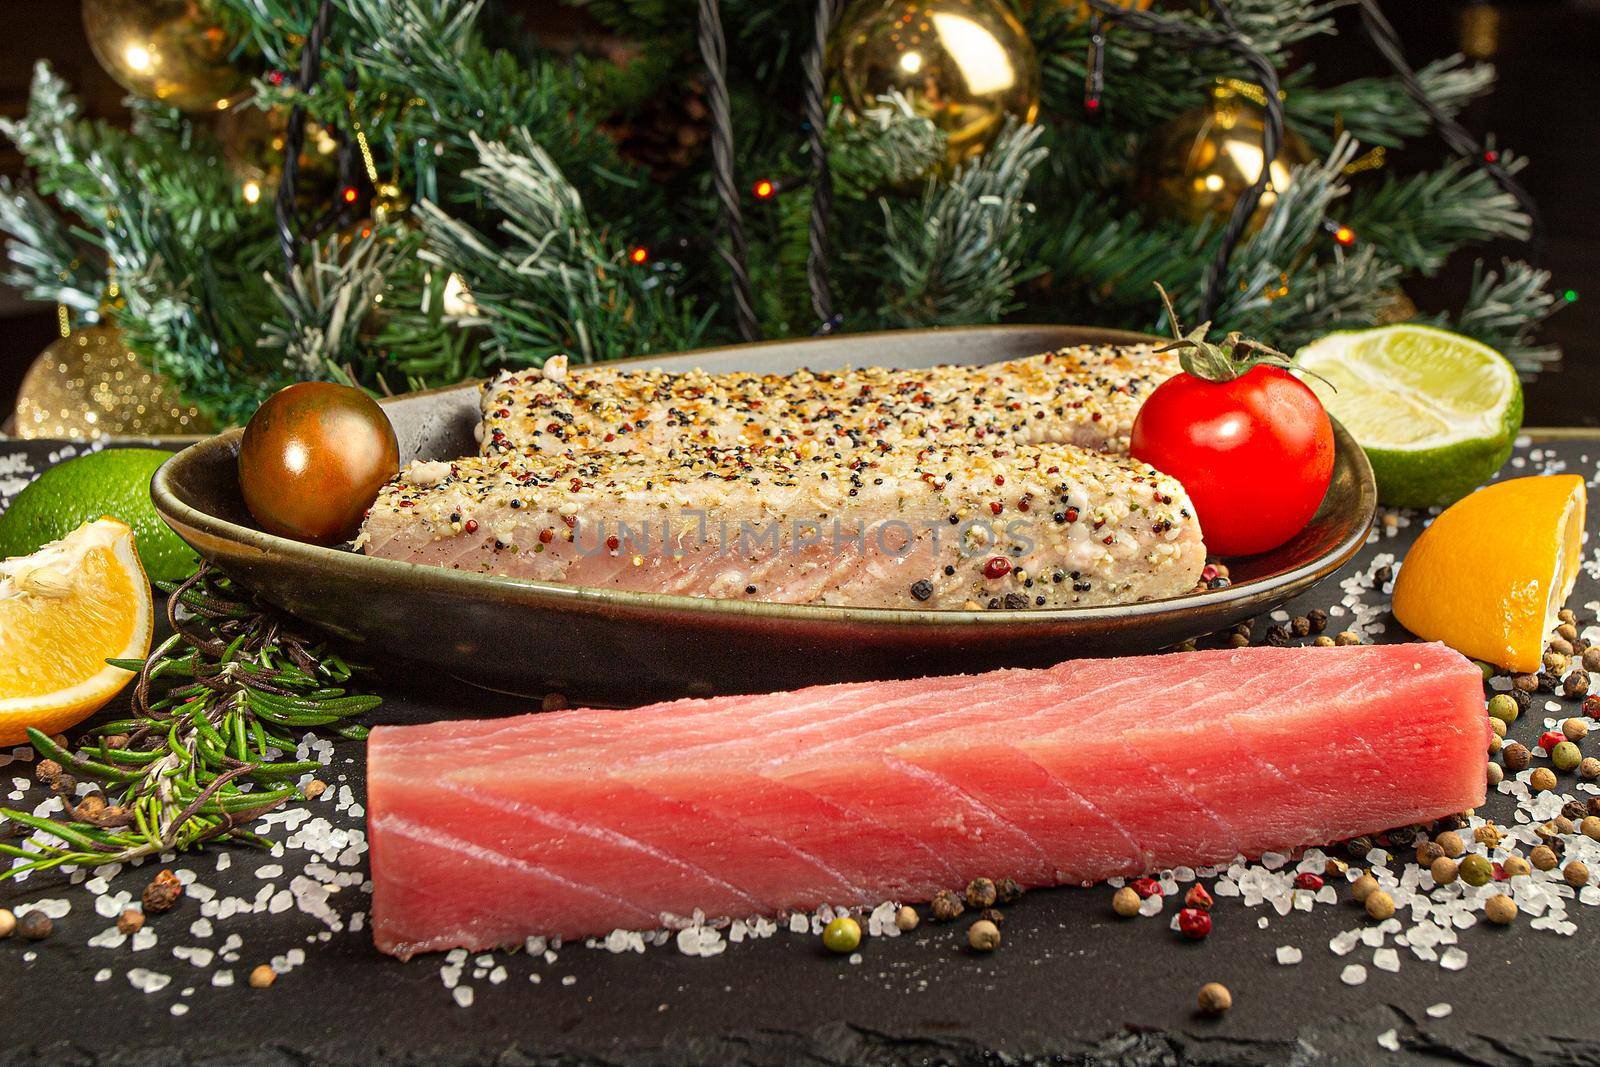 Stone slate tray with tuna steak fried in sesame seeds, tomatoes and citrus fruits, front view. Christmas and New Year background.